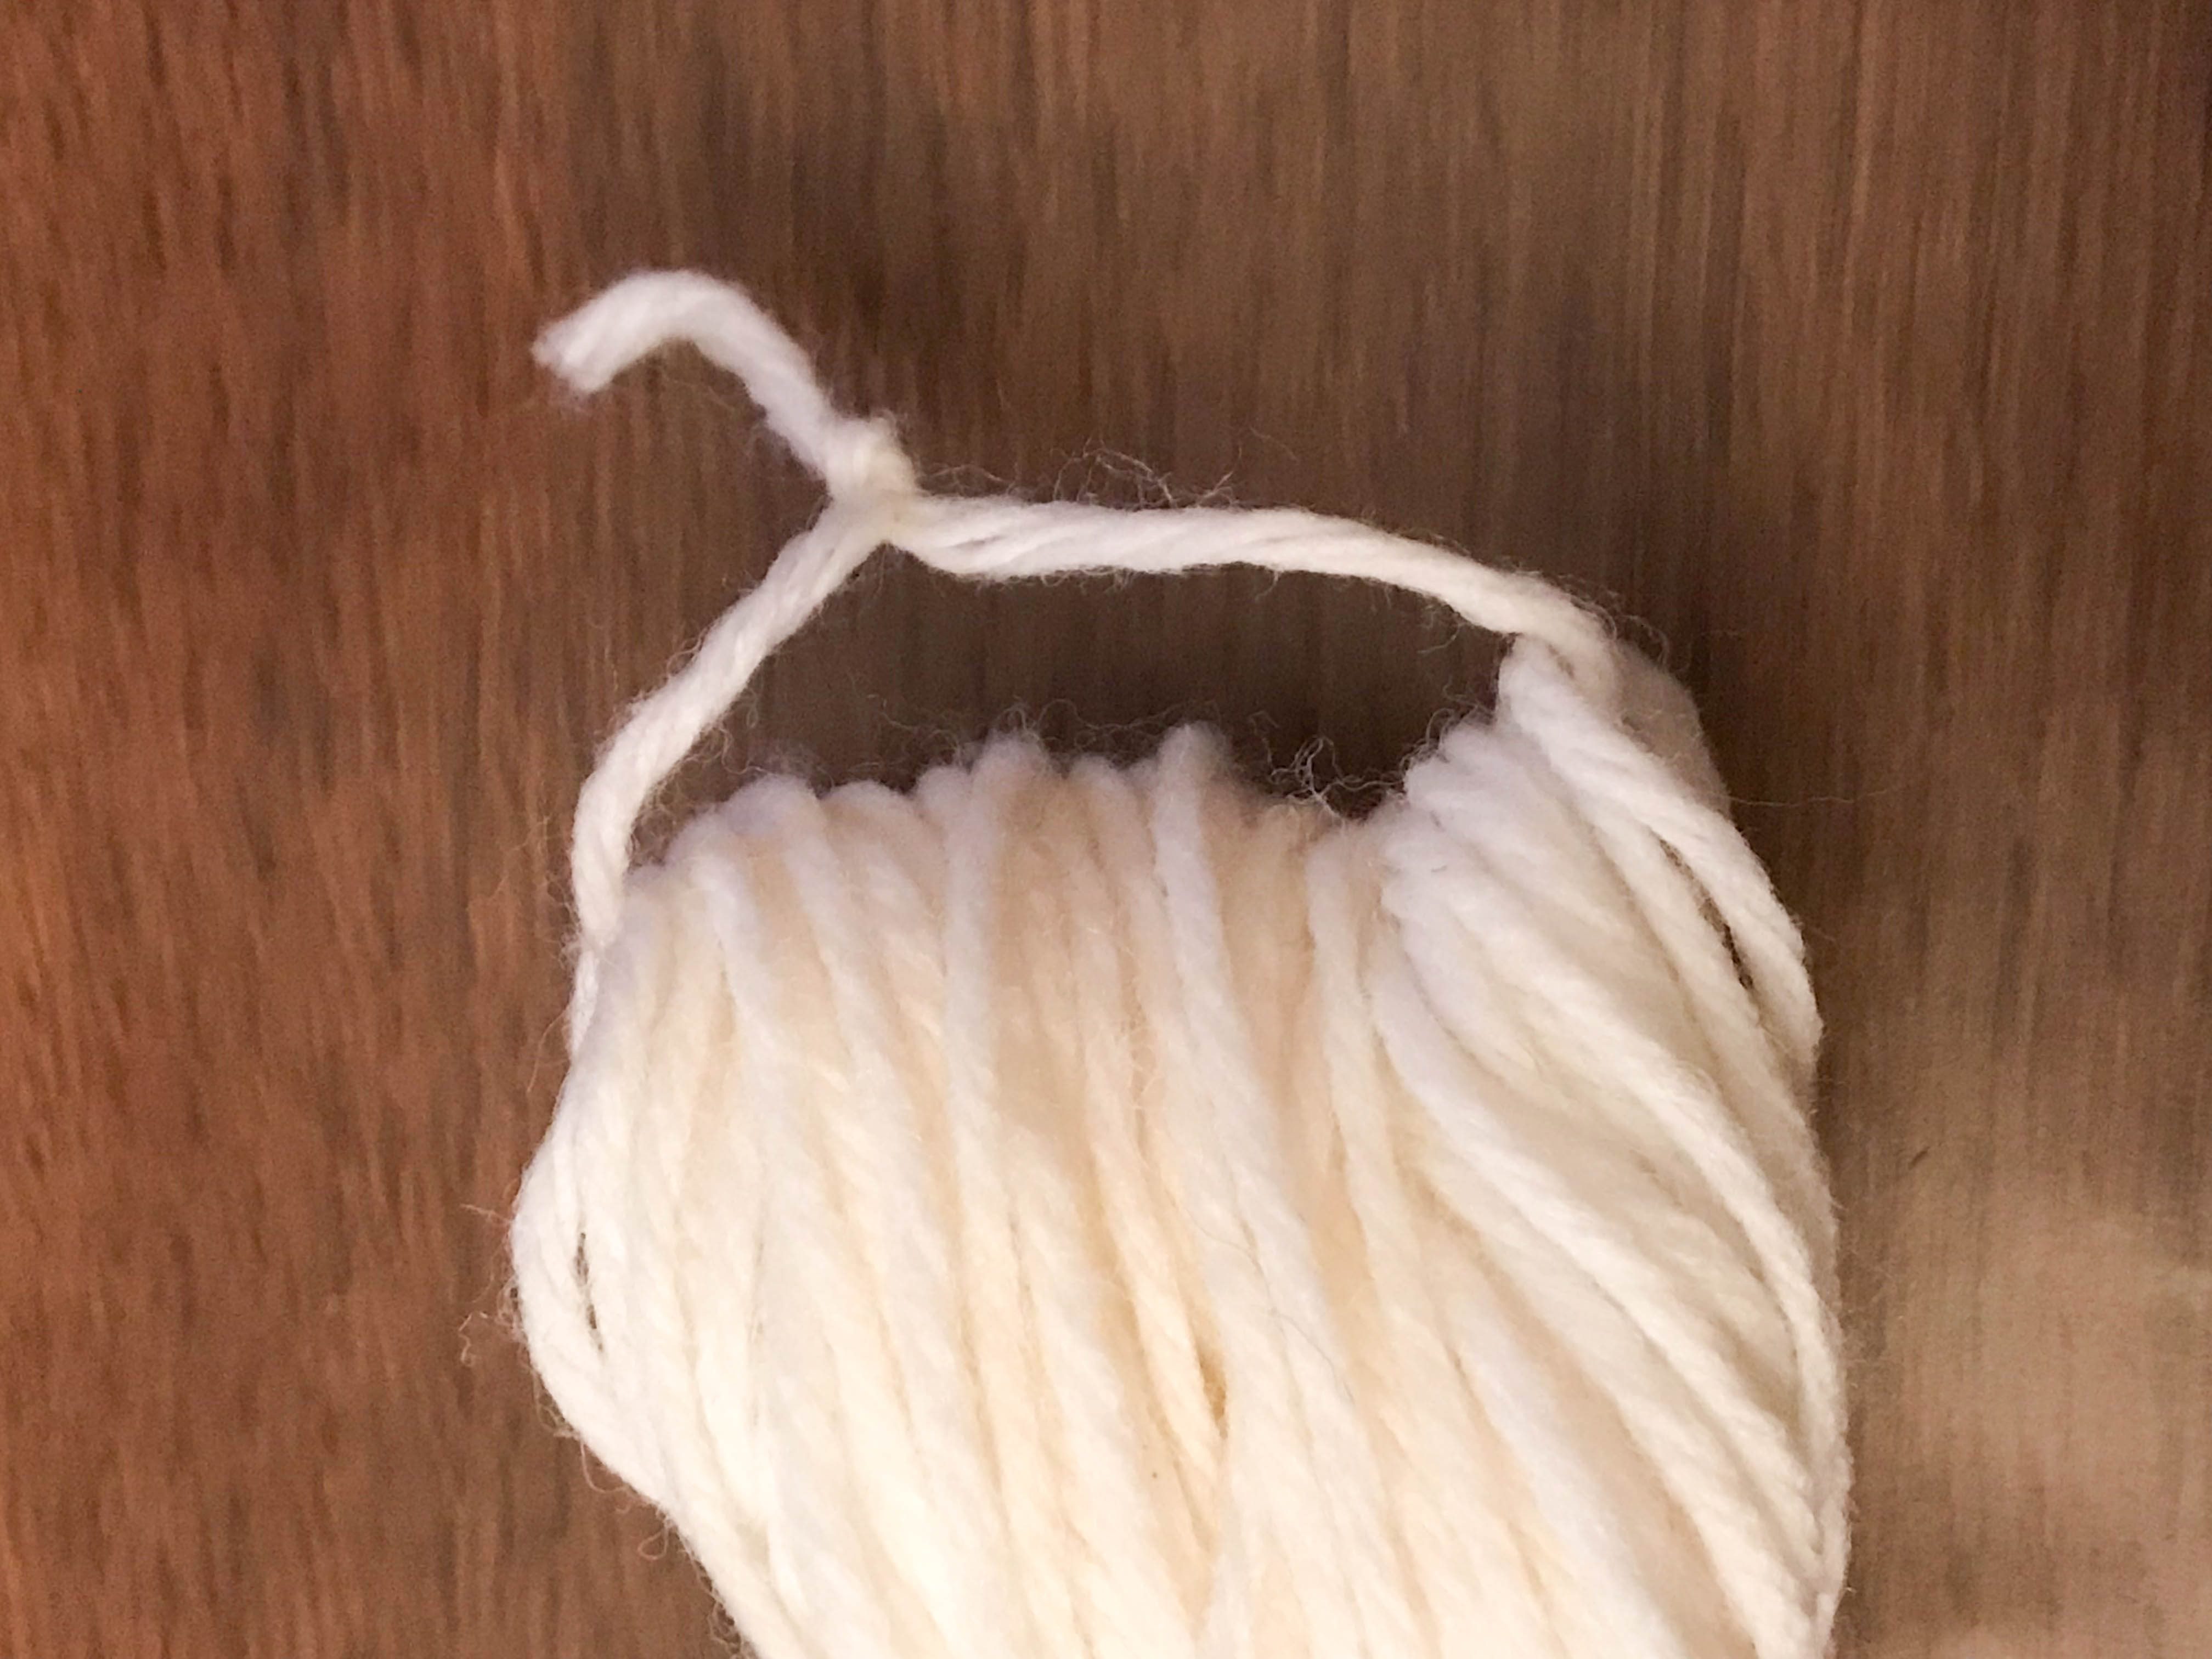 yarn wrapped with string